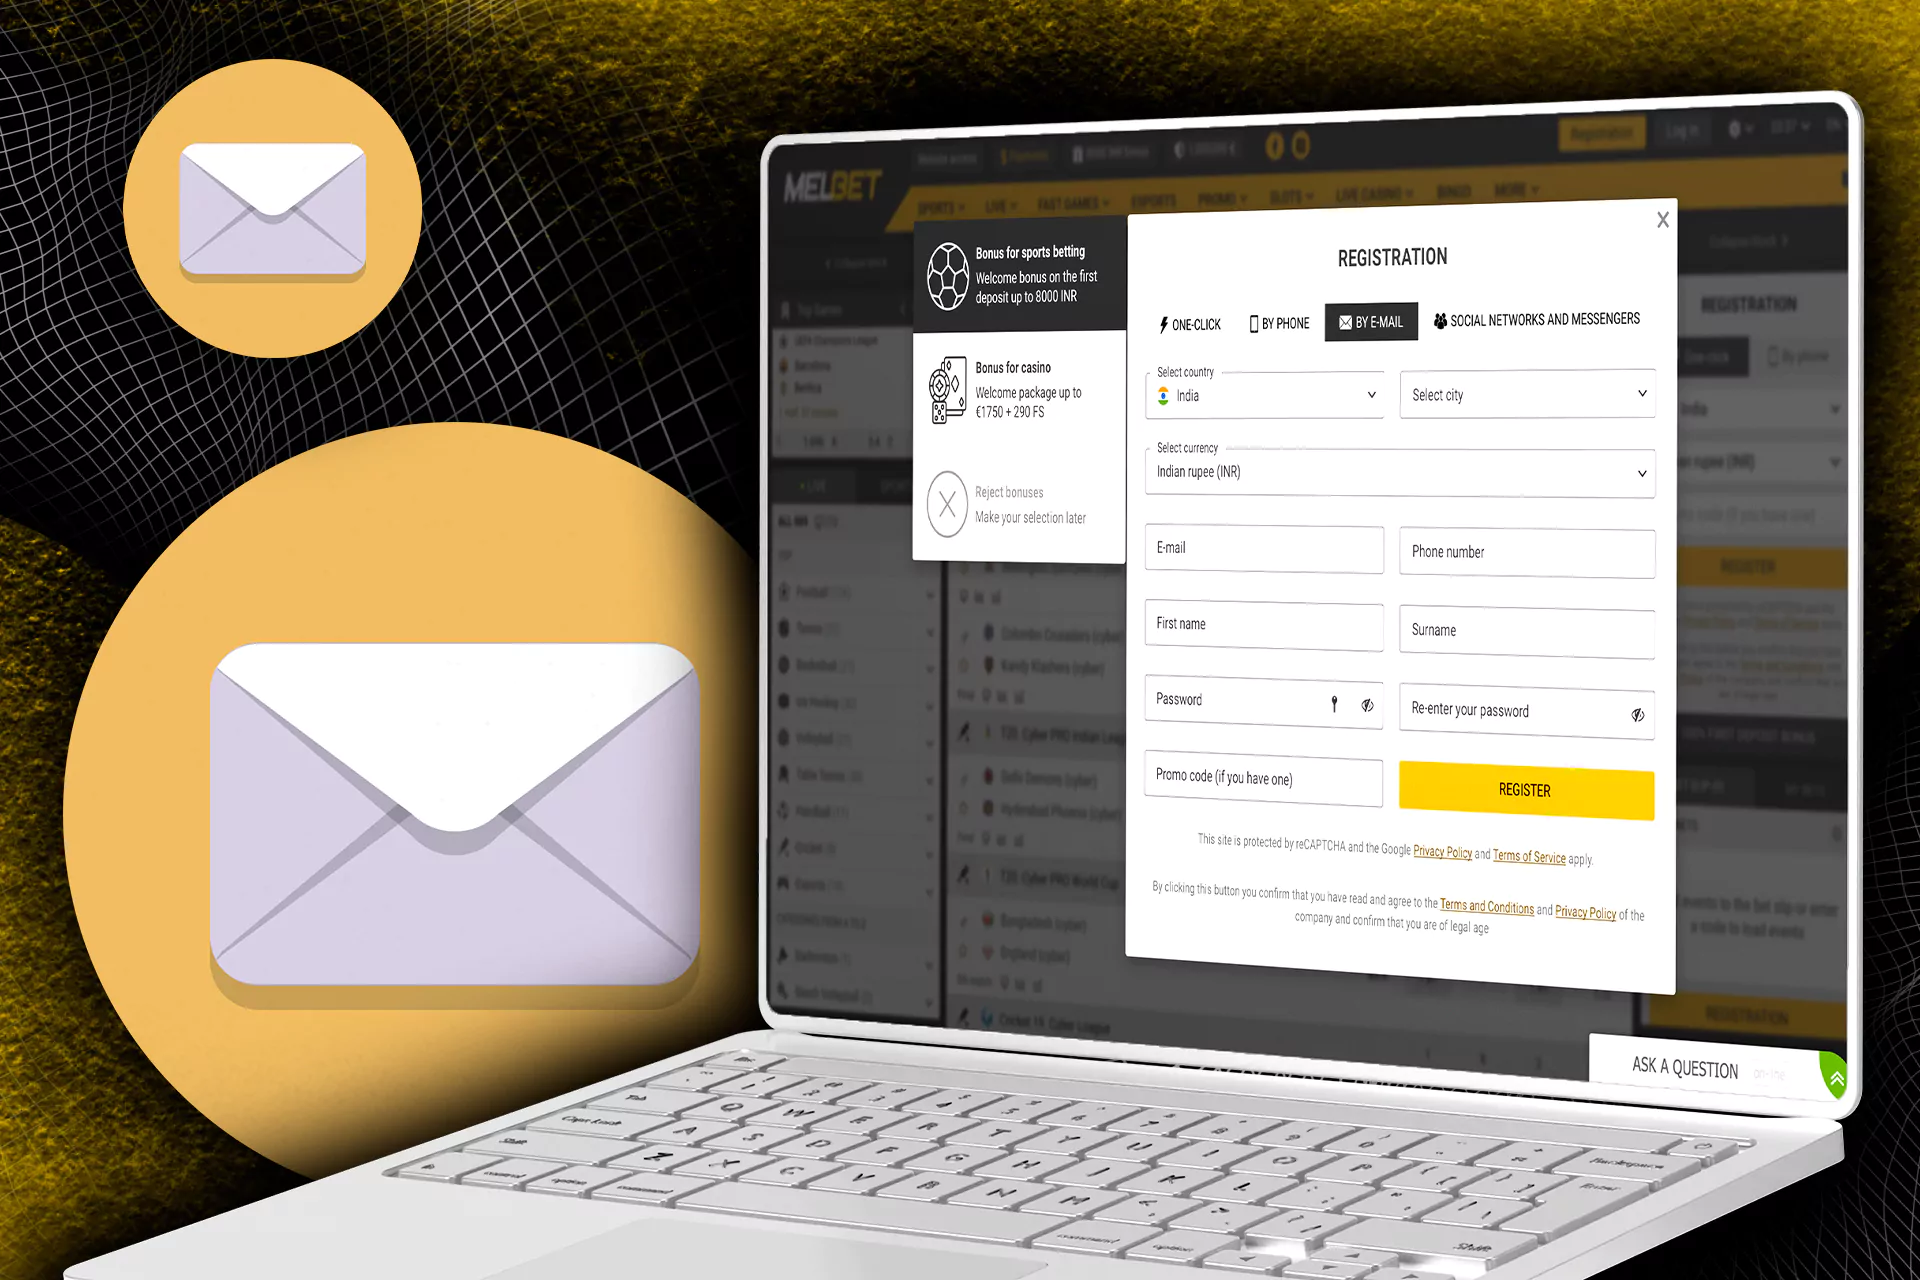 You can create your Melbet account using your email.